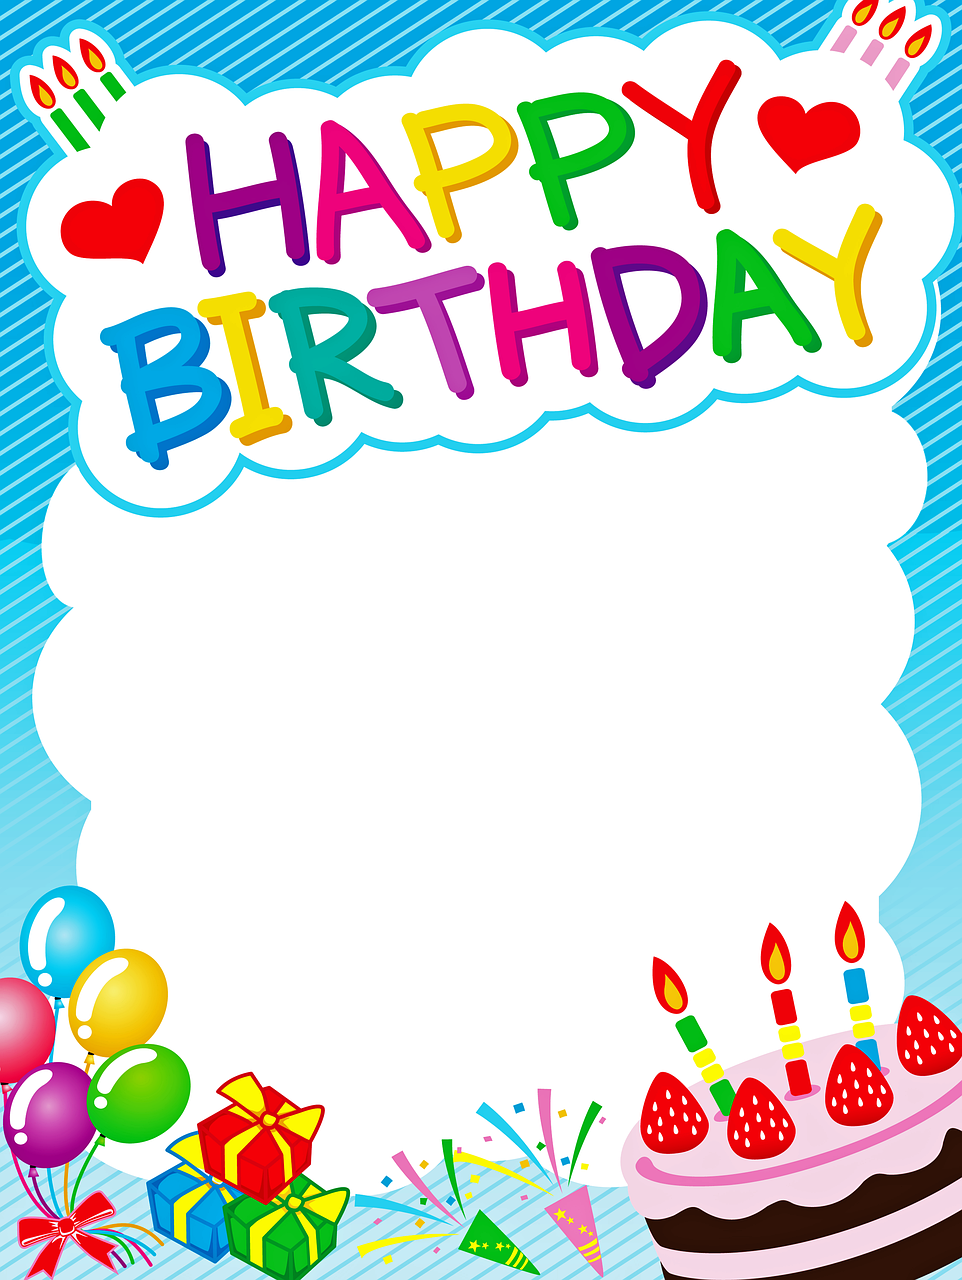 a birthday card with a cake and balloons, a picture, shutterstock, poster framed, background image, picture frames, stock photo